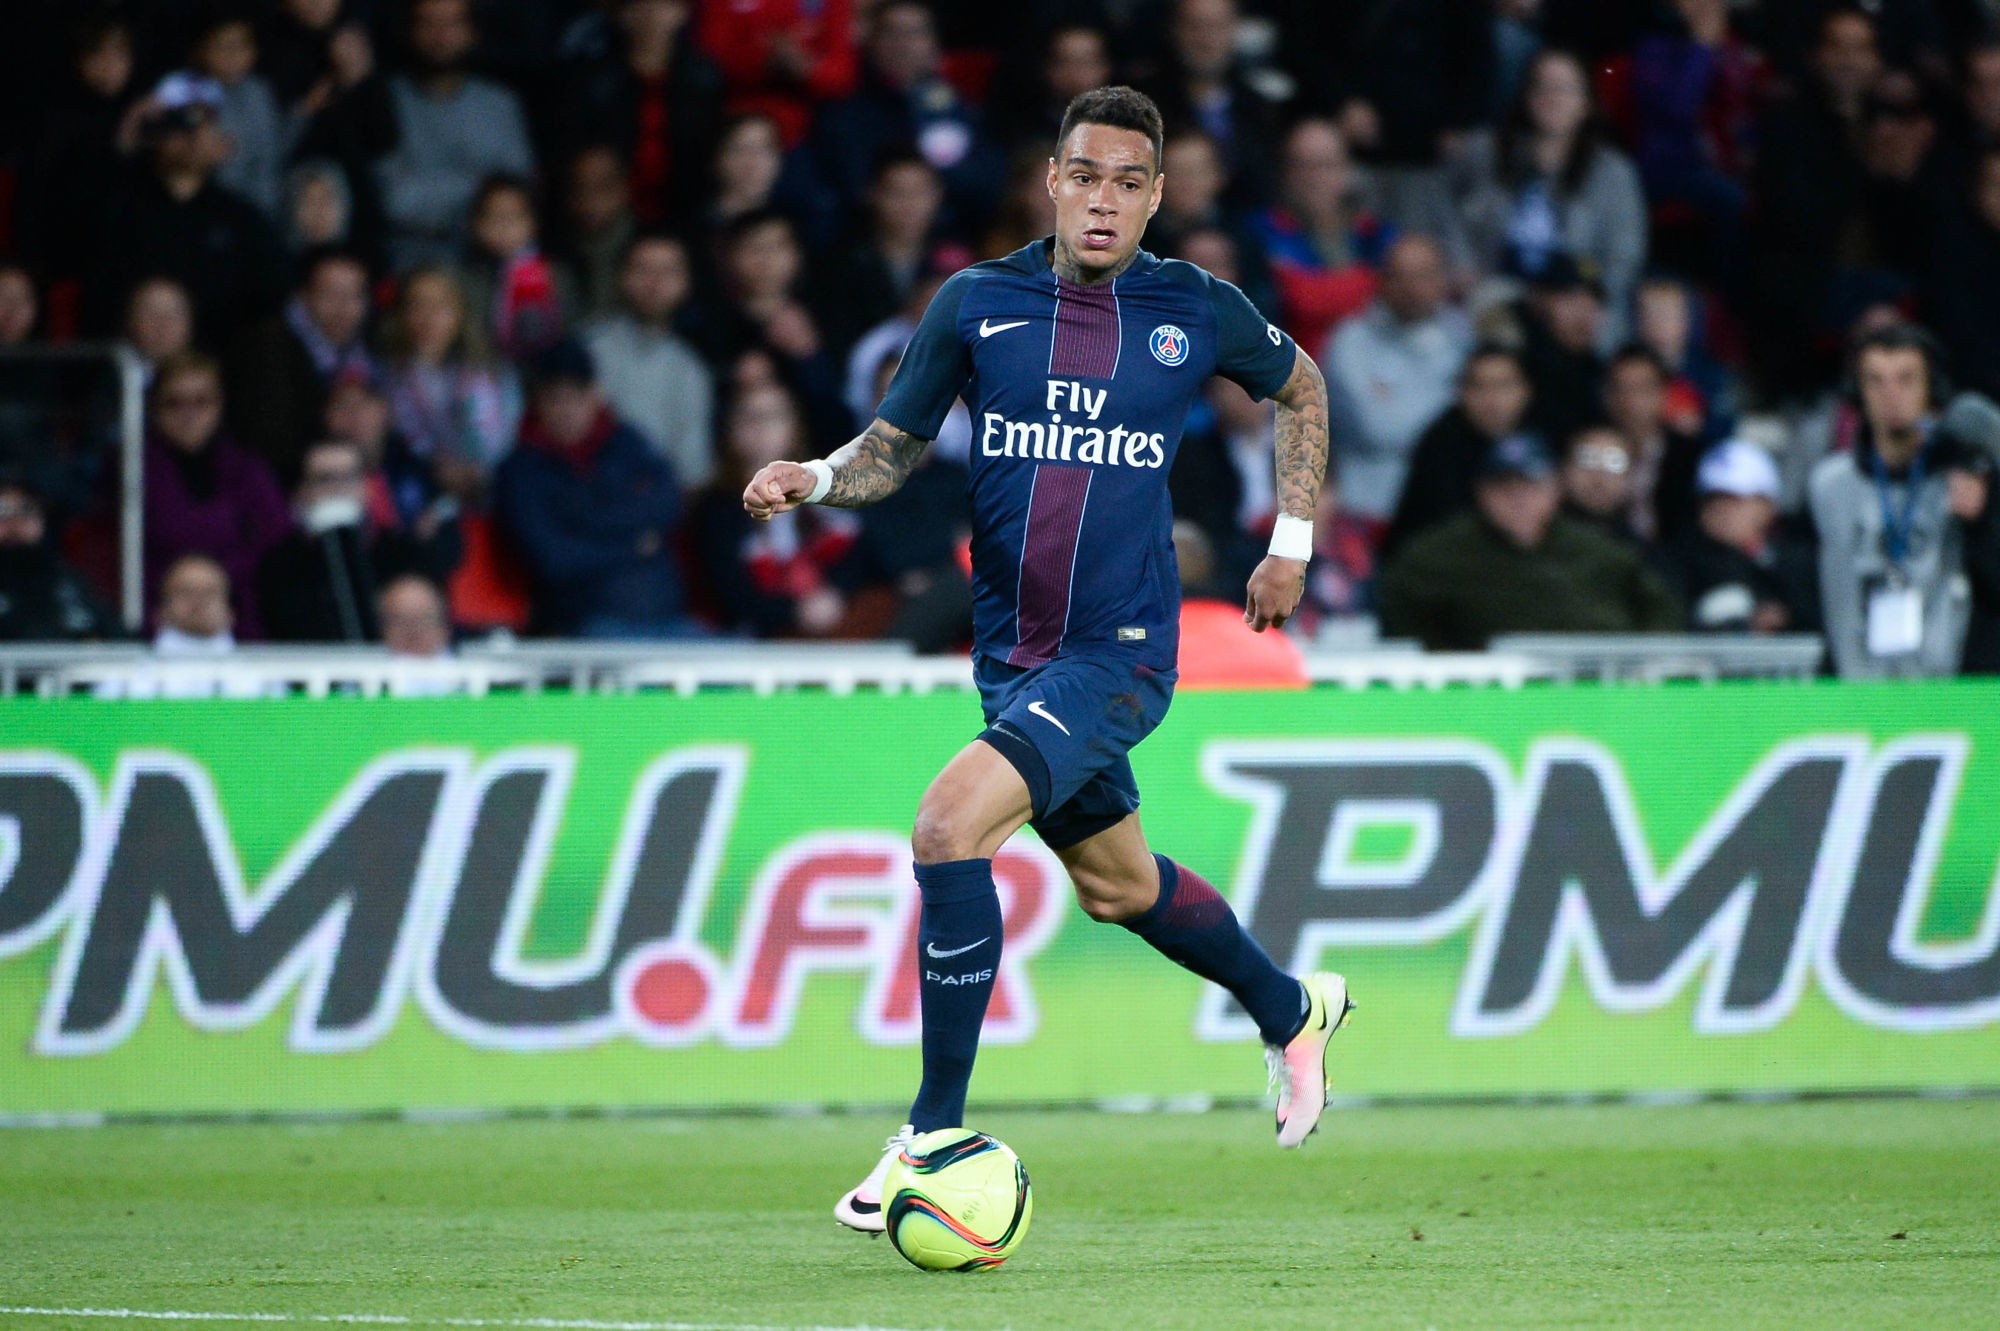 Gregory Van Der Wiel of PSG during the football french Ligue 1 match between Paris Saint-Germain and FC Nantes at Parc des Princes on May 14, 2016 in Paris, France. (Photo by Nolwenn Le Gouic/Icon Spo